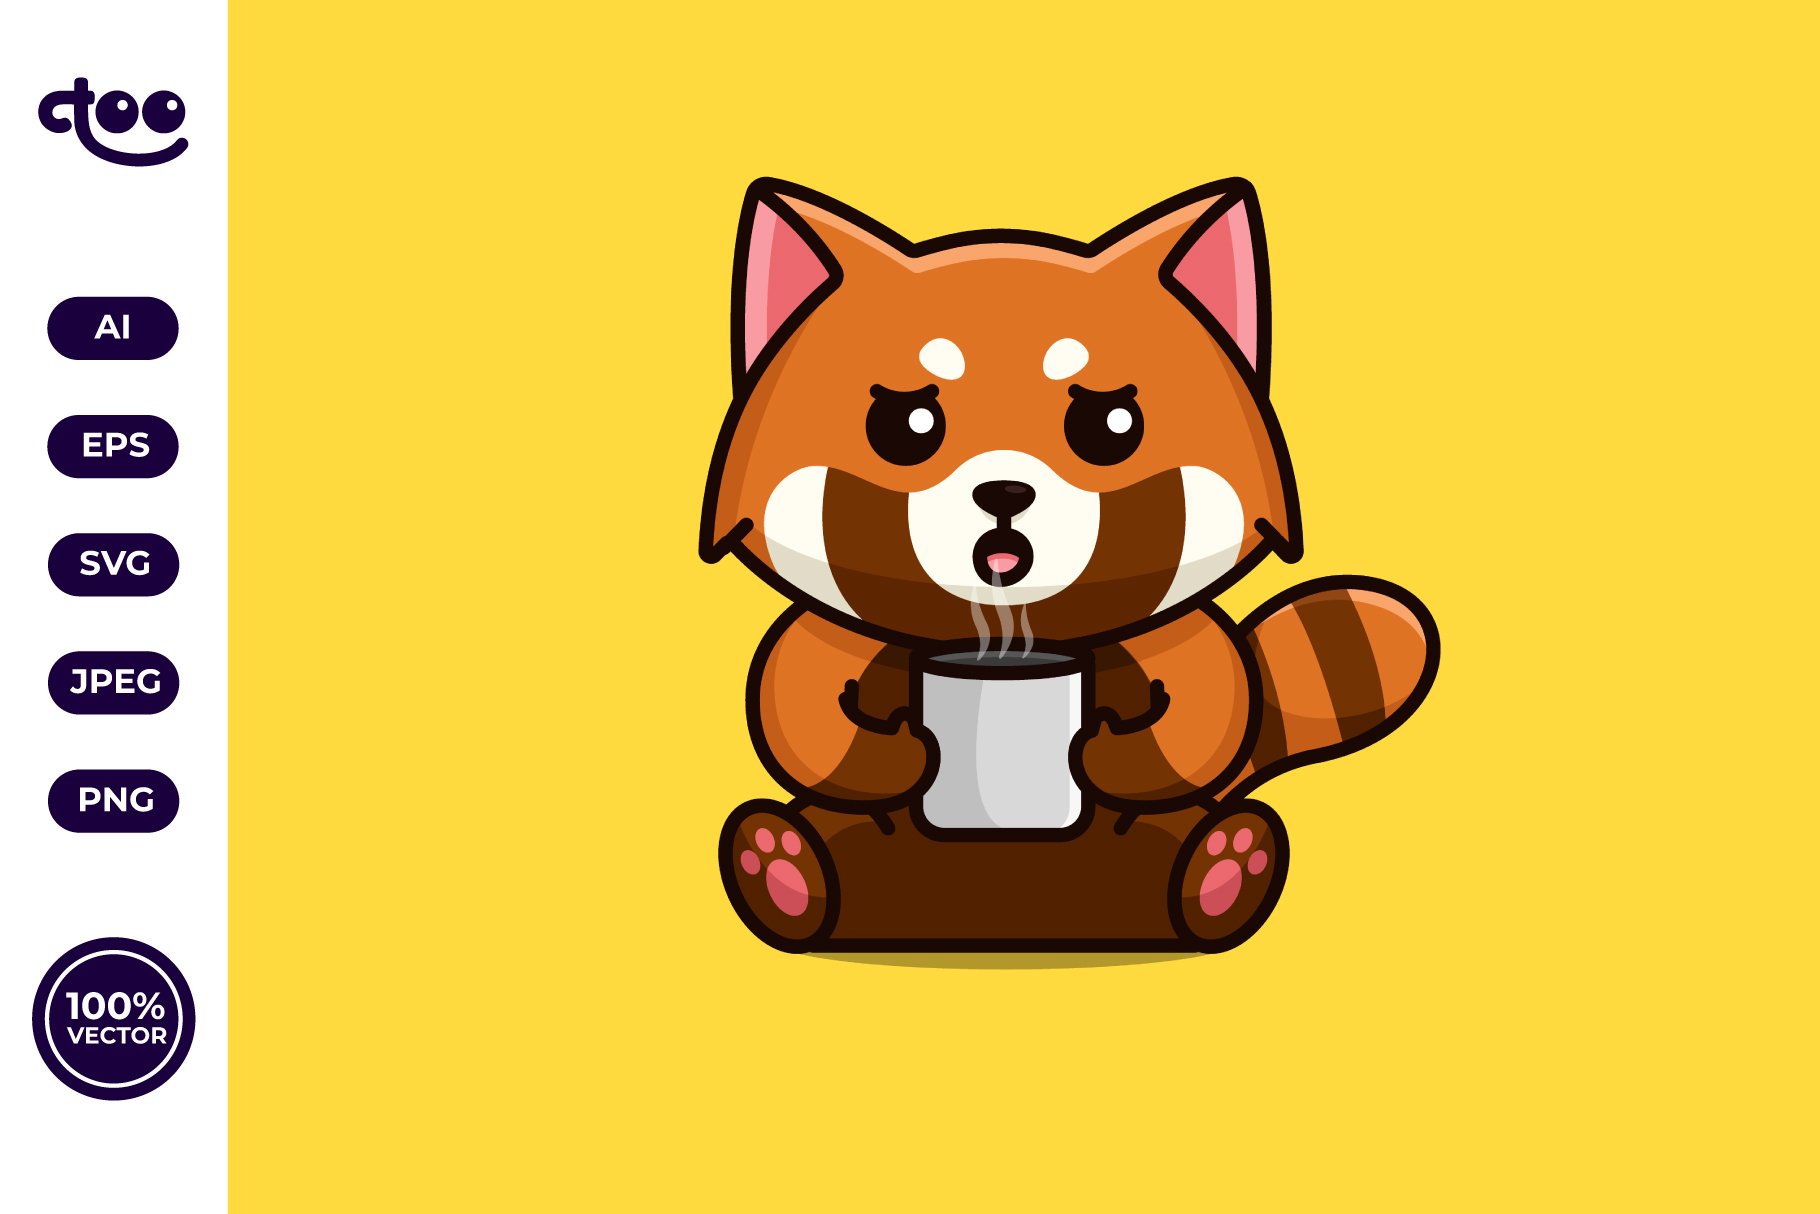 Cute red panda drink coffee cover image.